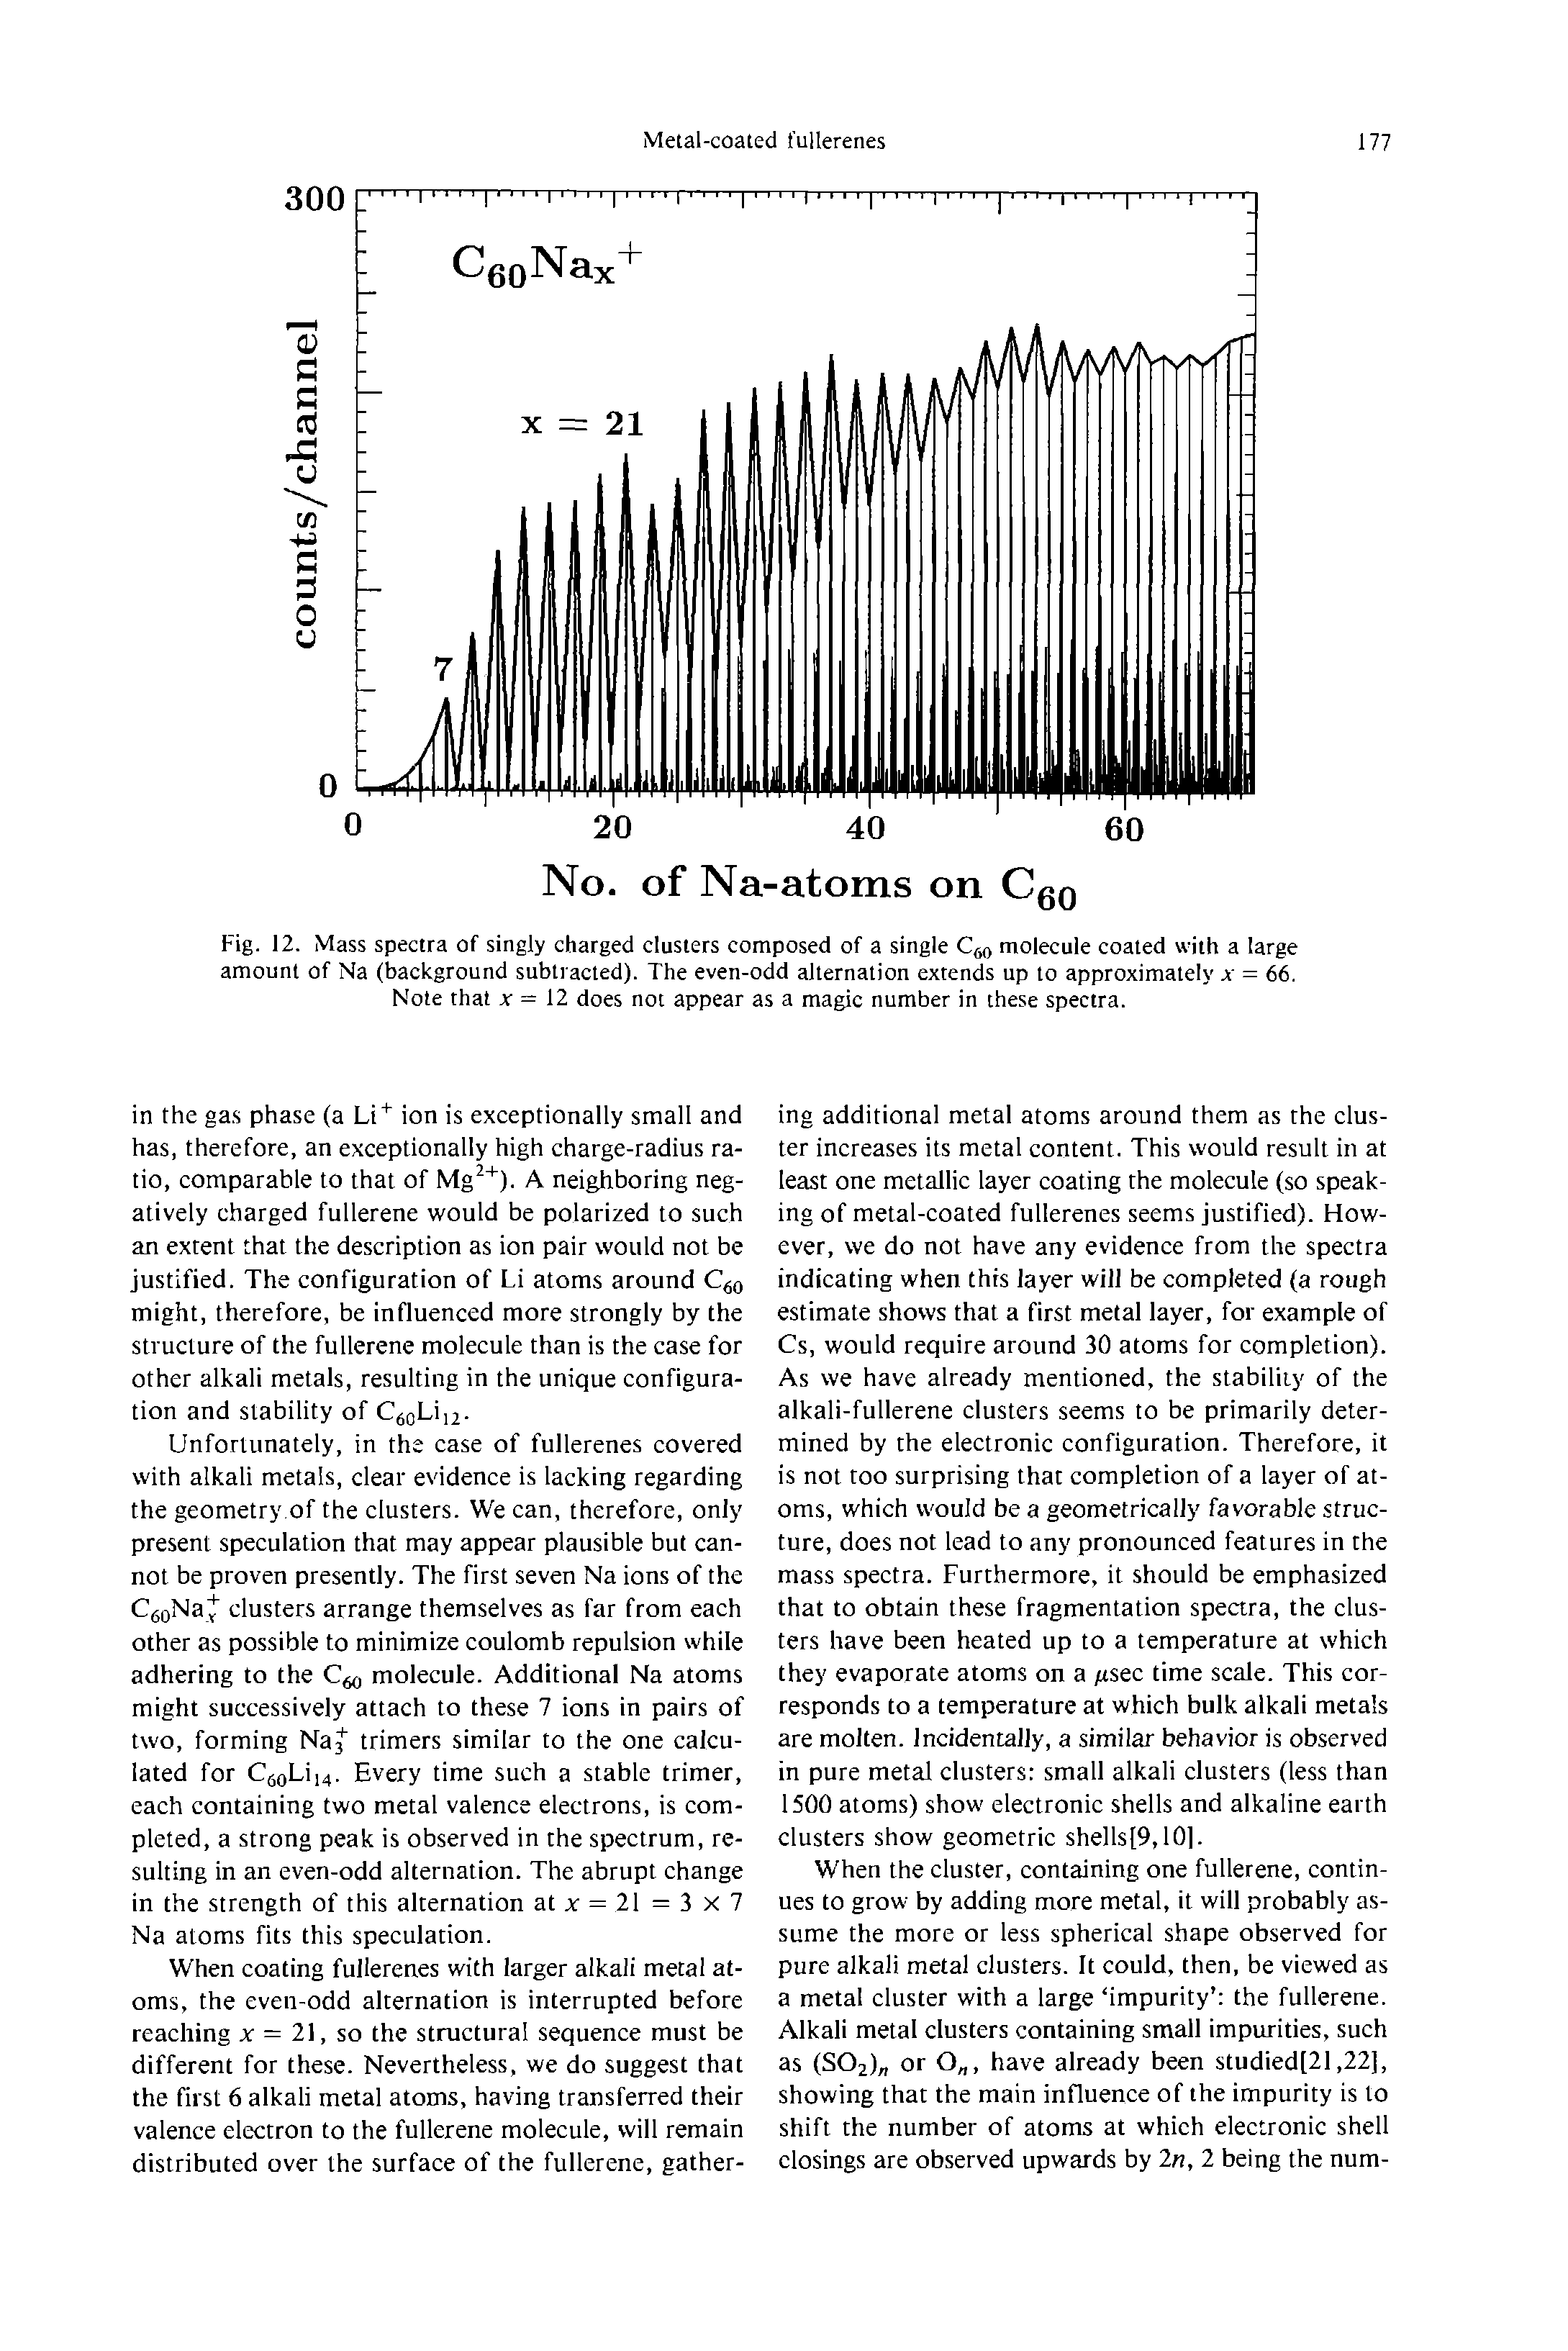 Fig. 12. Mass spectra of singly charged clusters composed of a single Qo molecule coated with a large amount of Na (background subtracted). The even-odd alternation extends up to approximately x = 66. Note that x = 12 does not appear as a magic number in these spectra.